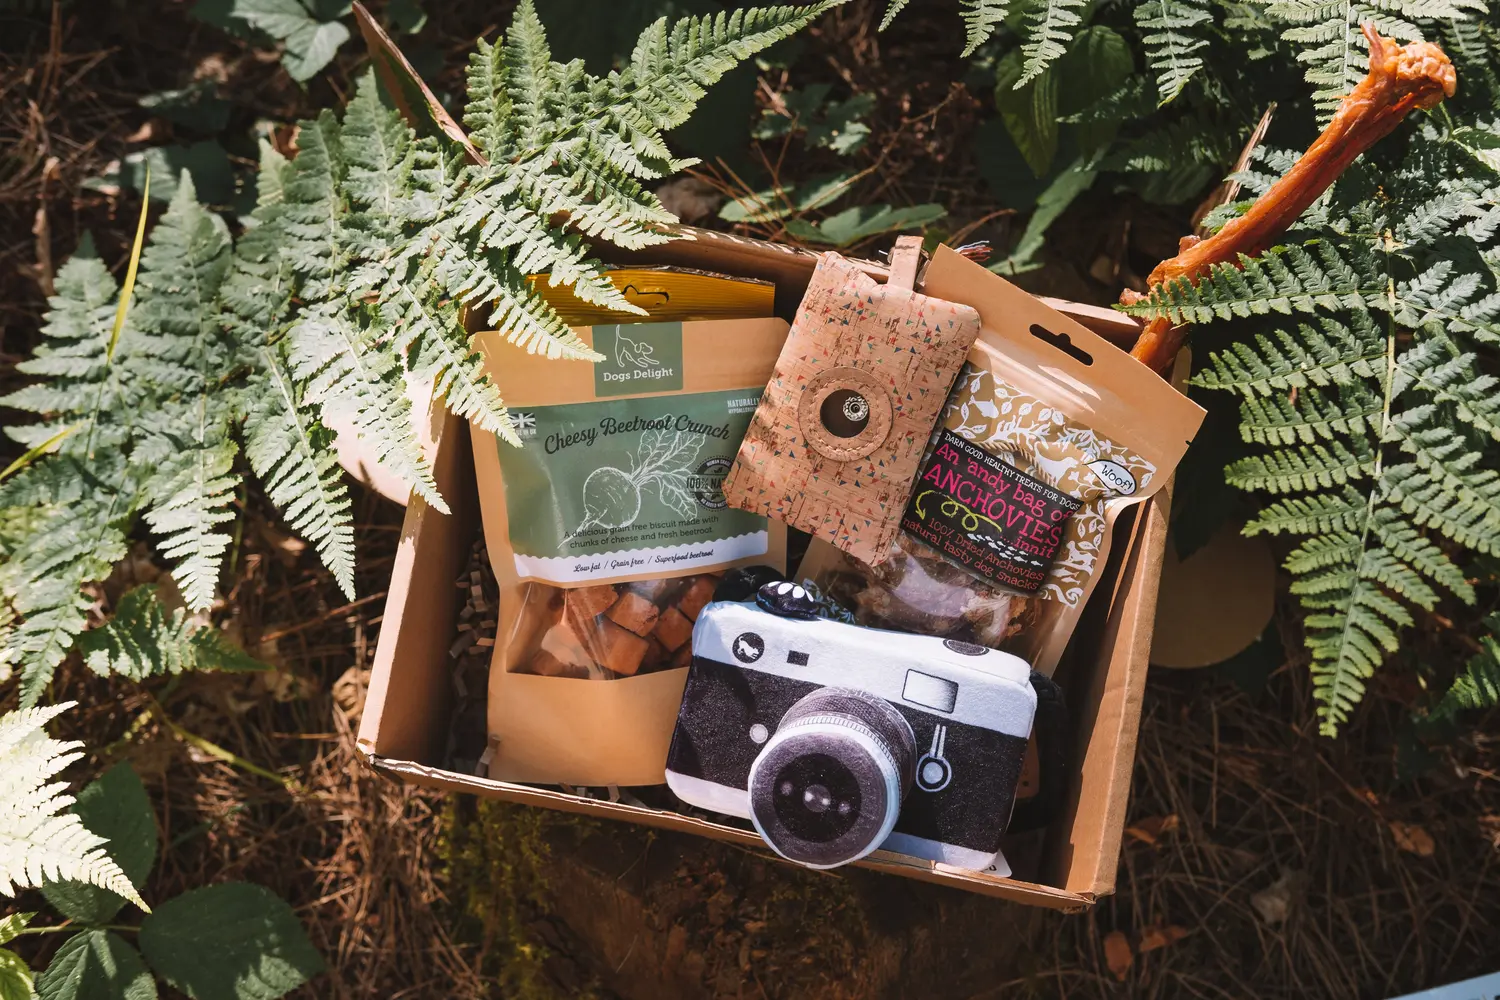 Eco-friendly dog treats and subscription boxes